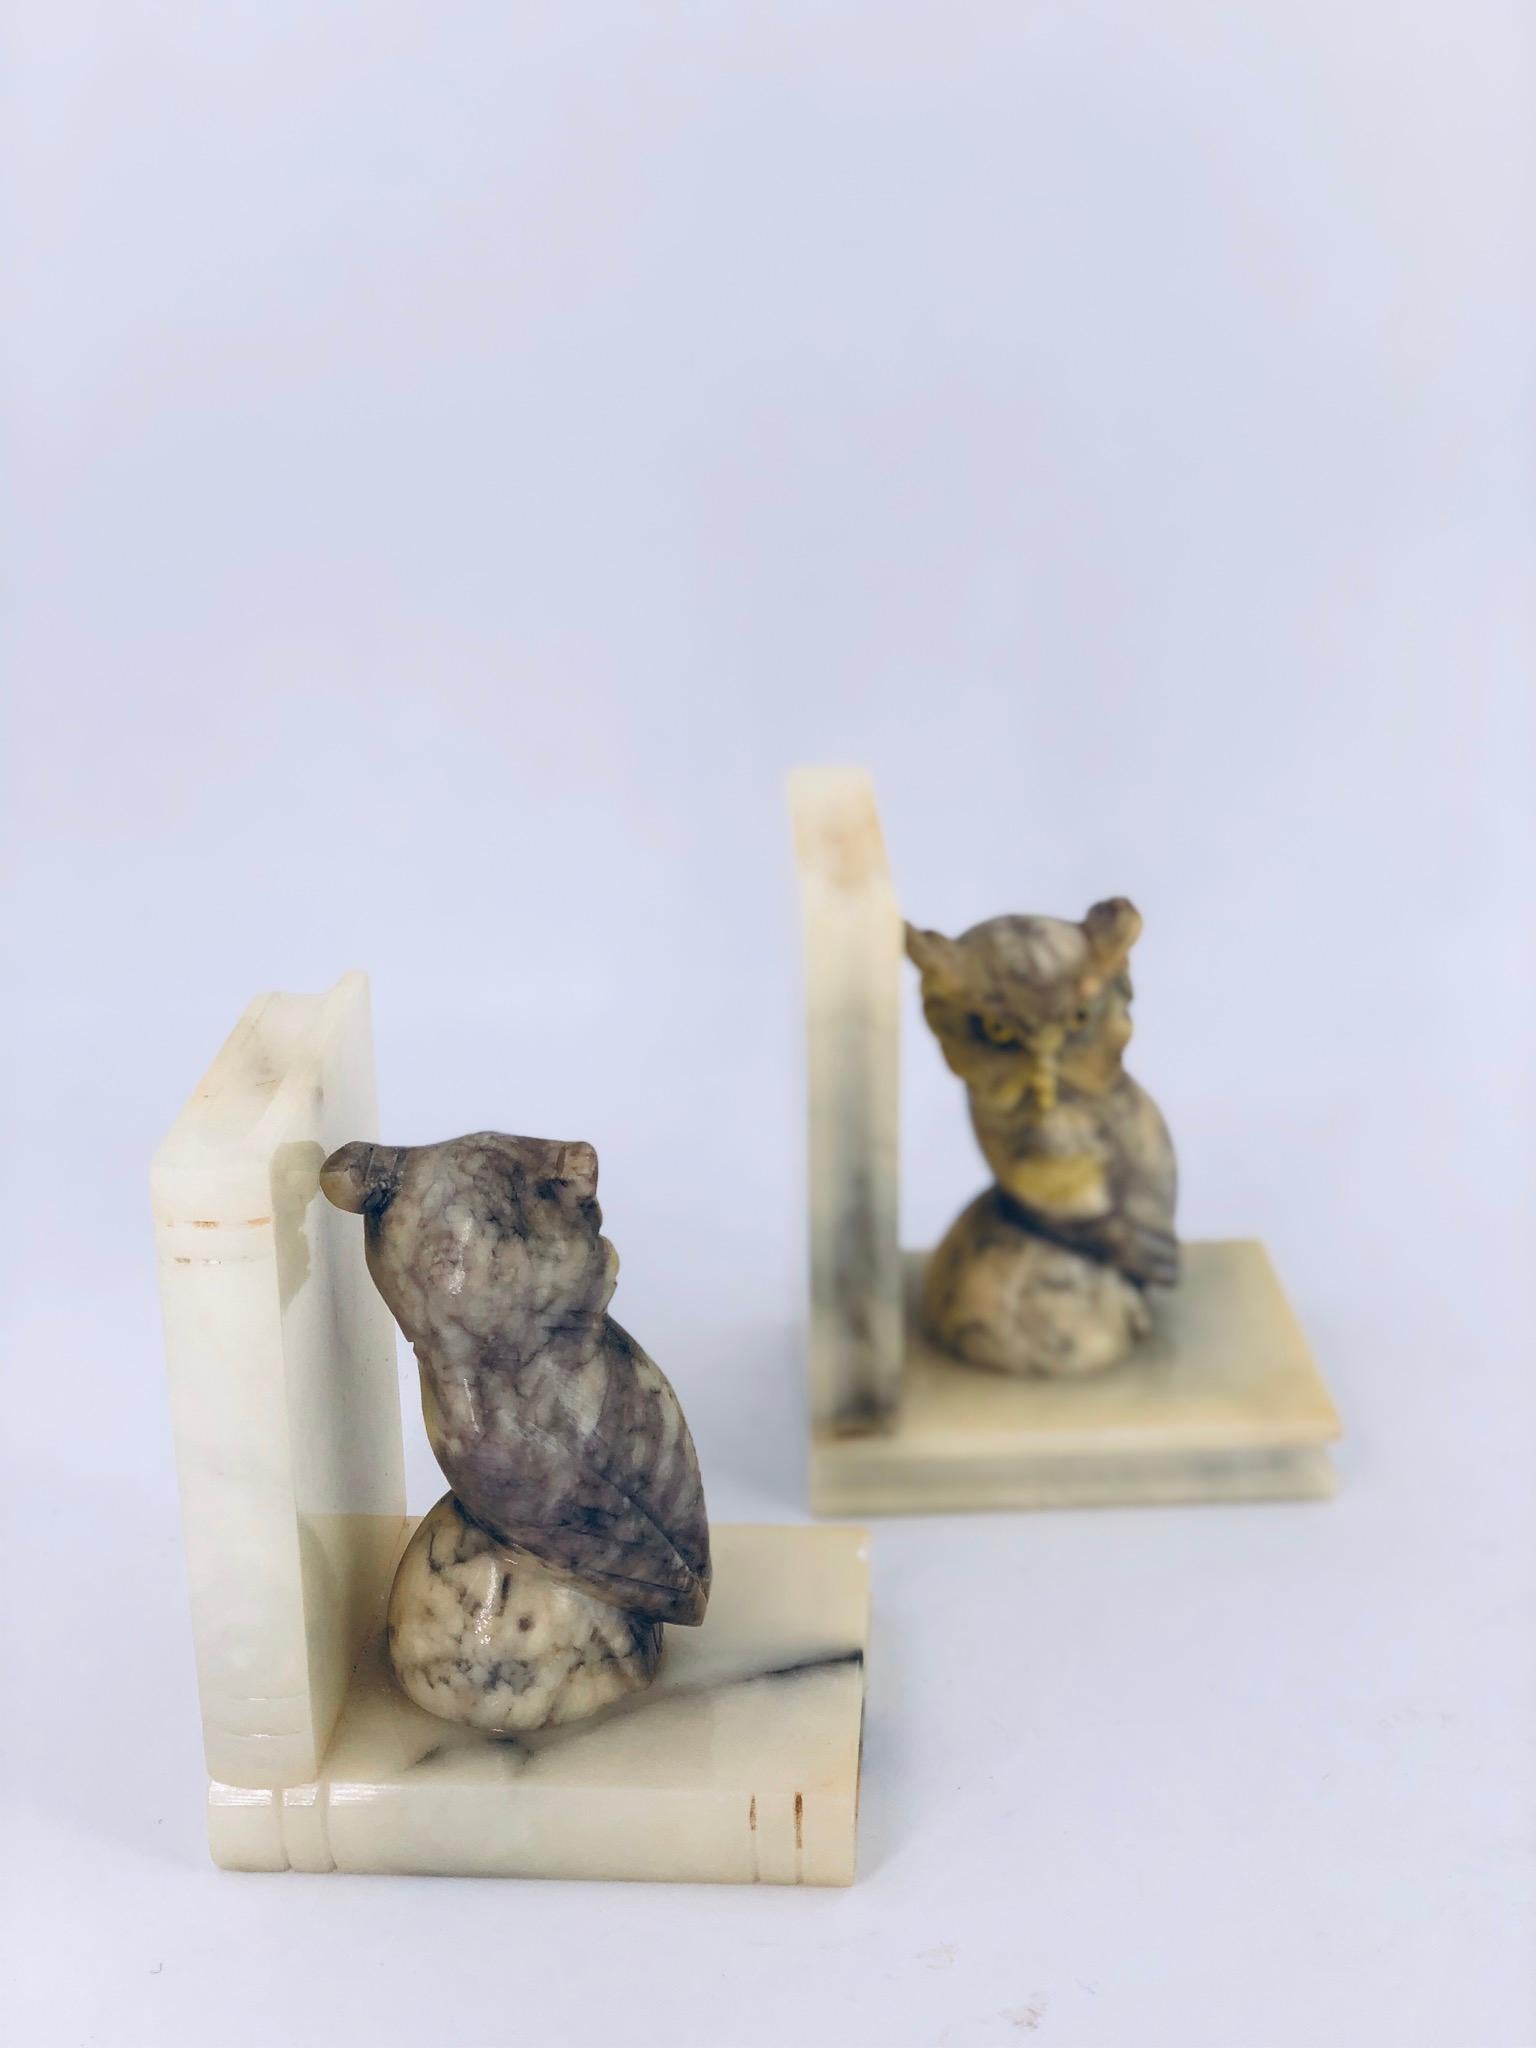 Whimsical pair of collectible bookends in marble very collectible made in Italy, circa 1960s, retains label as shown one of them shows a chip that's been ground on the top corner side, as shown in the picture these are sold in AS/IS condition that's